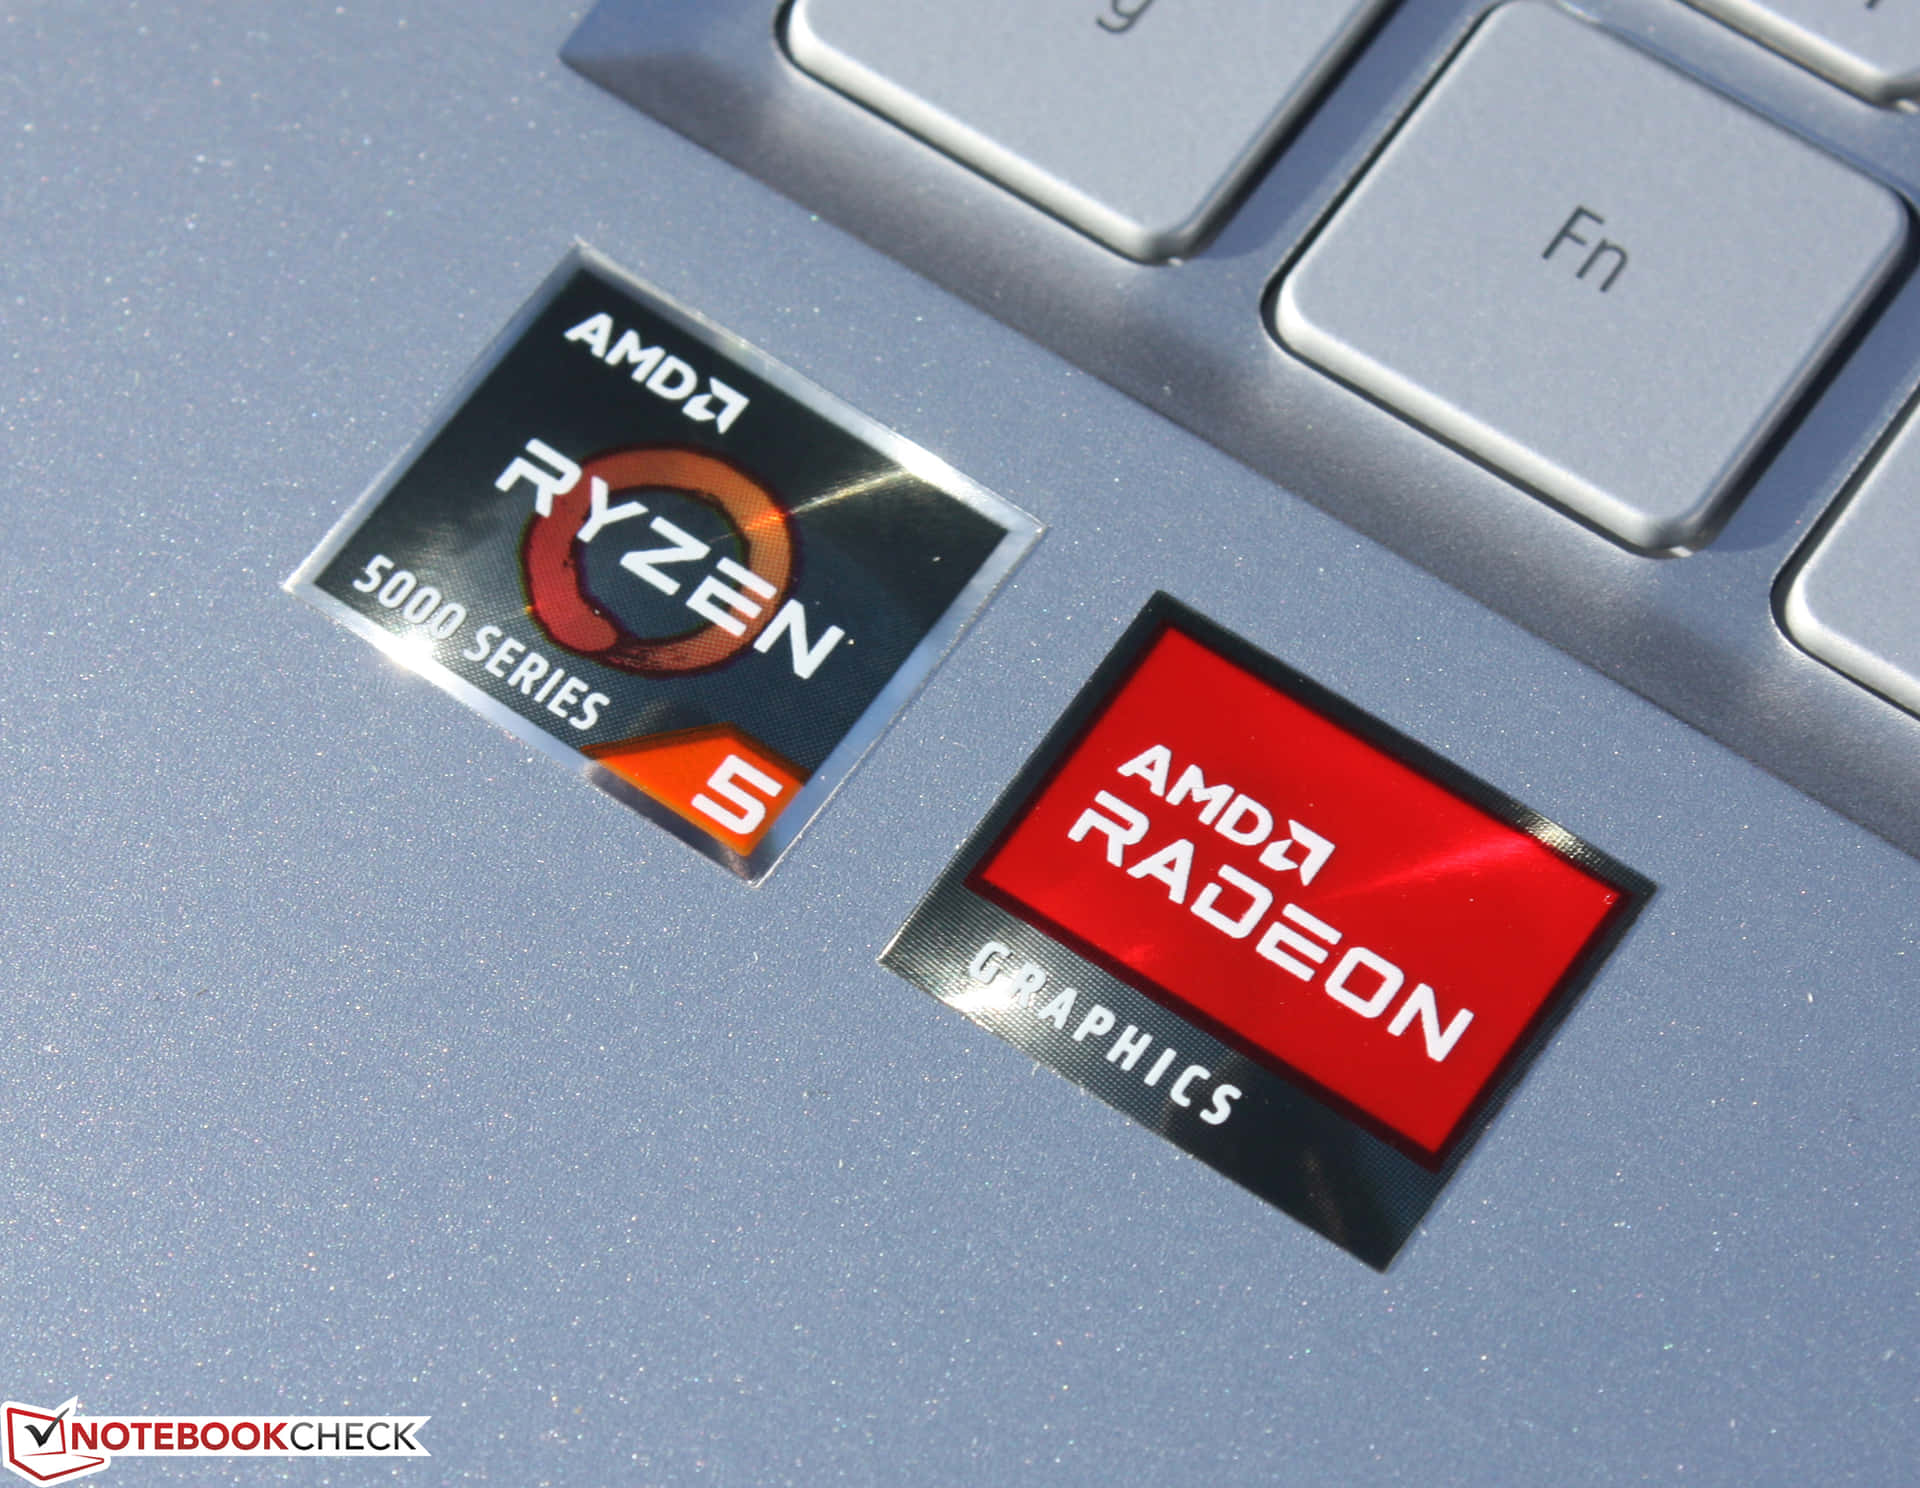 Explore Possibilities With AMD